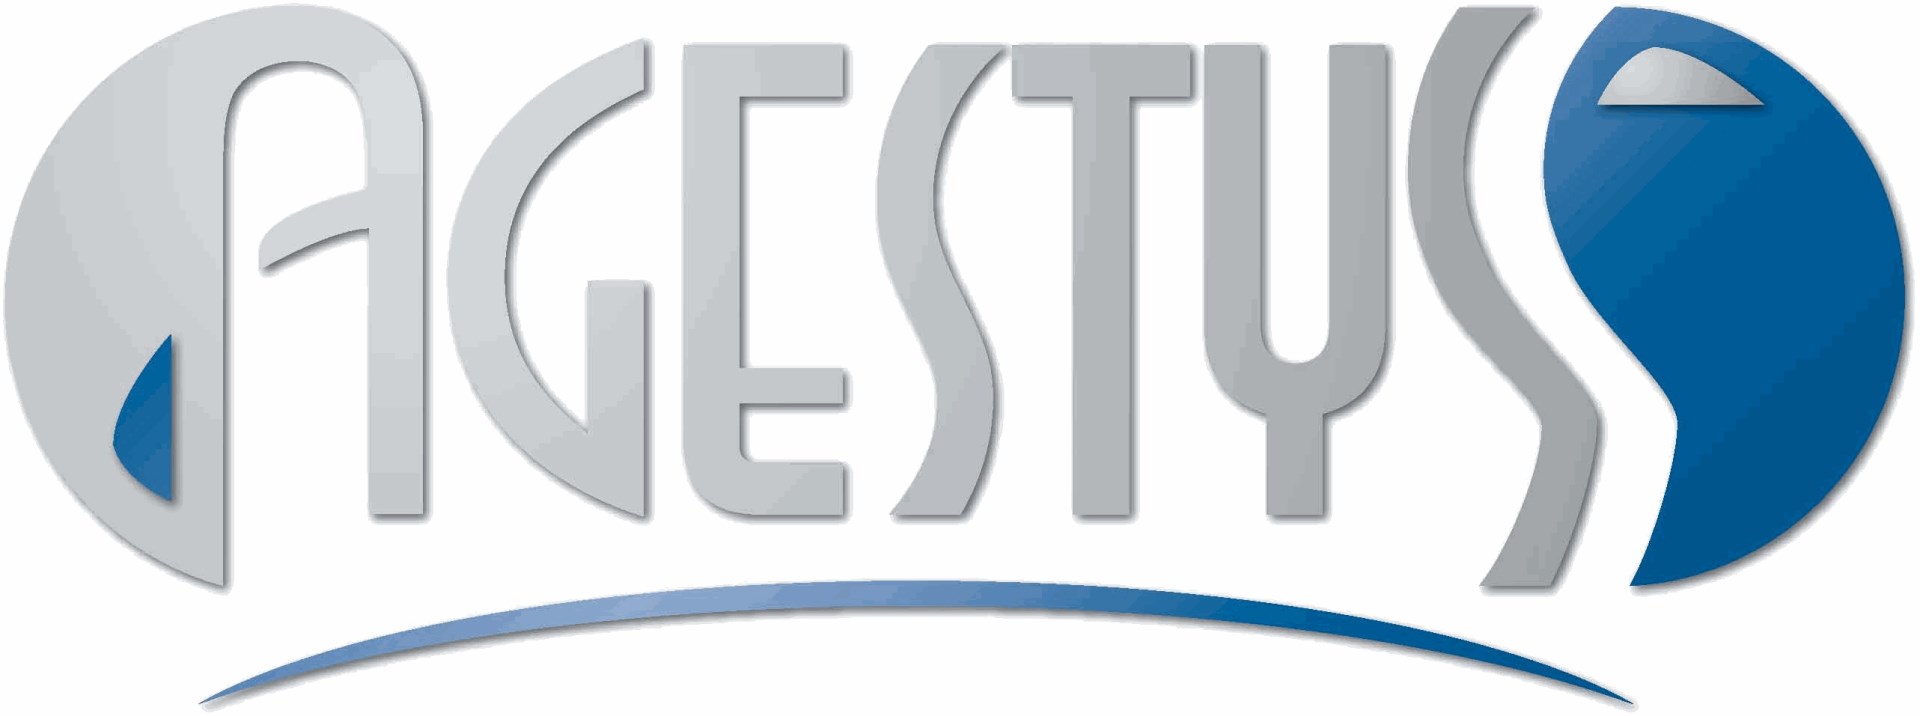 Agestys